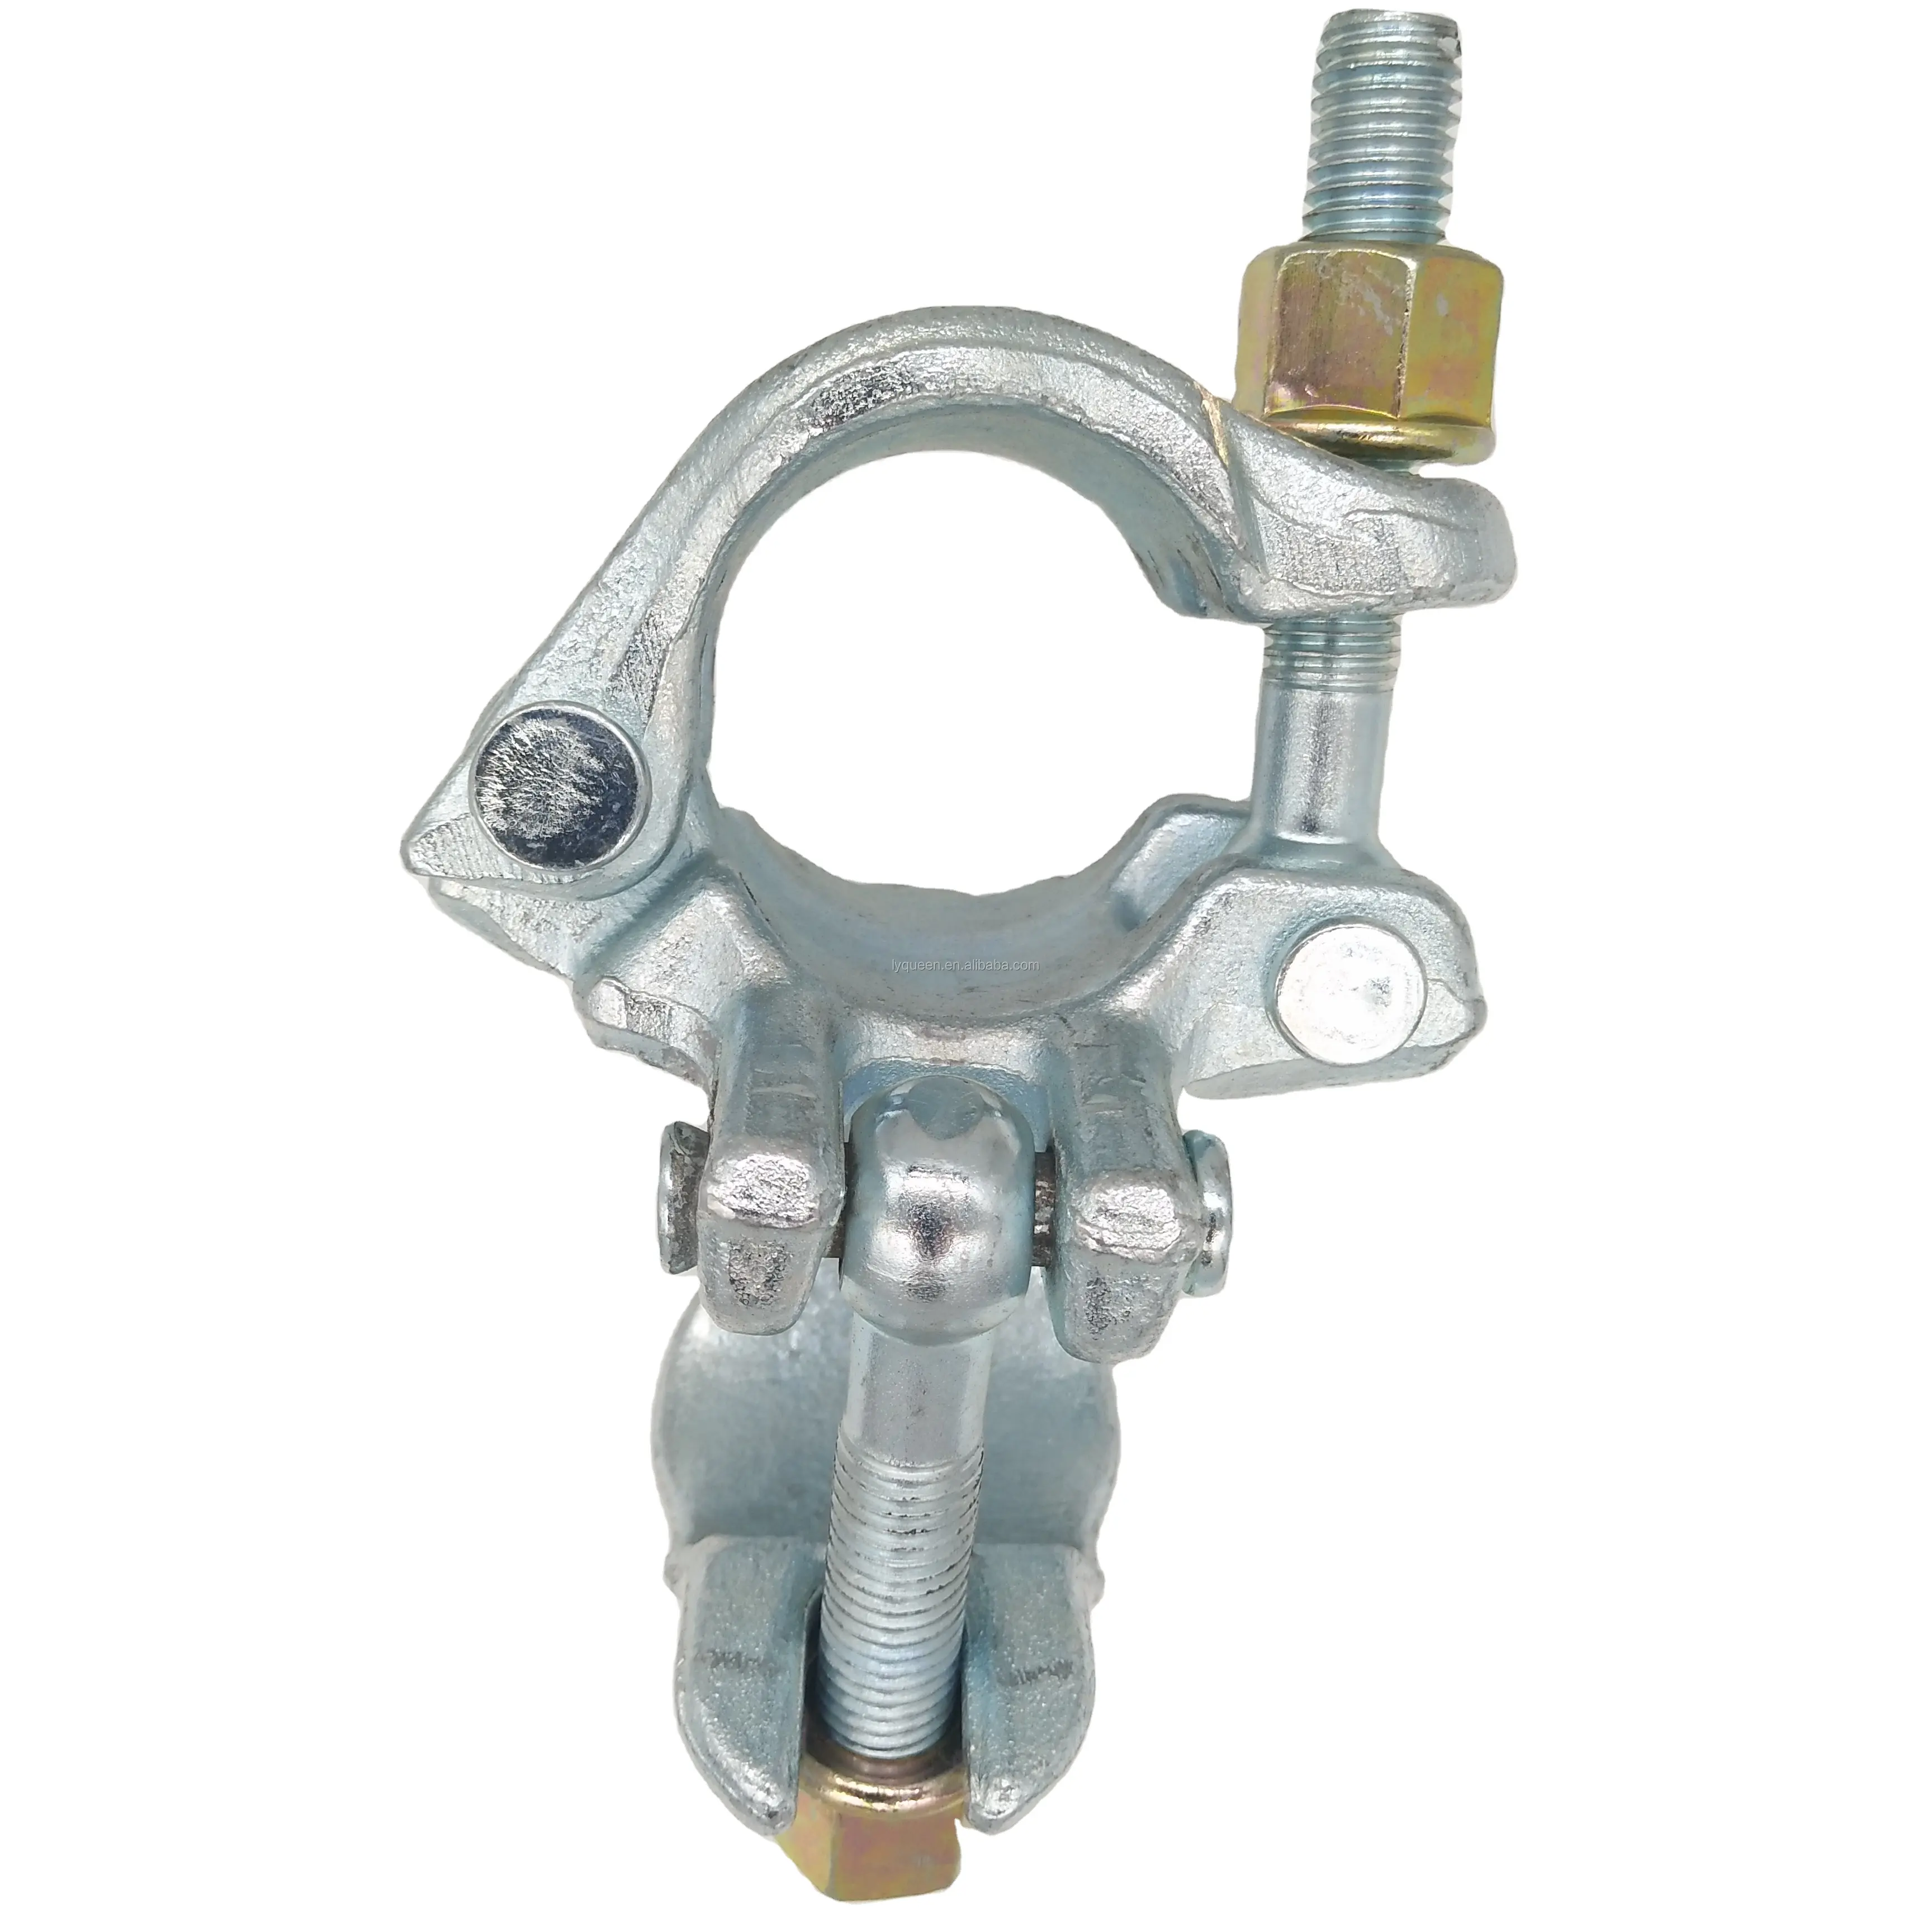 QUEEN Scaffolding Galvanized 48.3mm Swivel and Fixed Euro Hoarding Couplers Tube Fittings